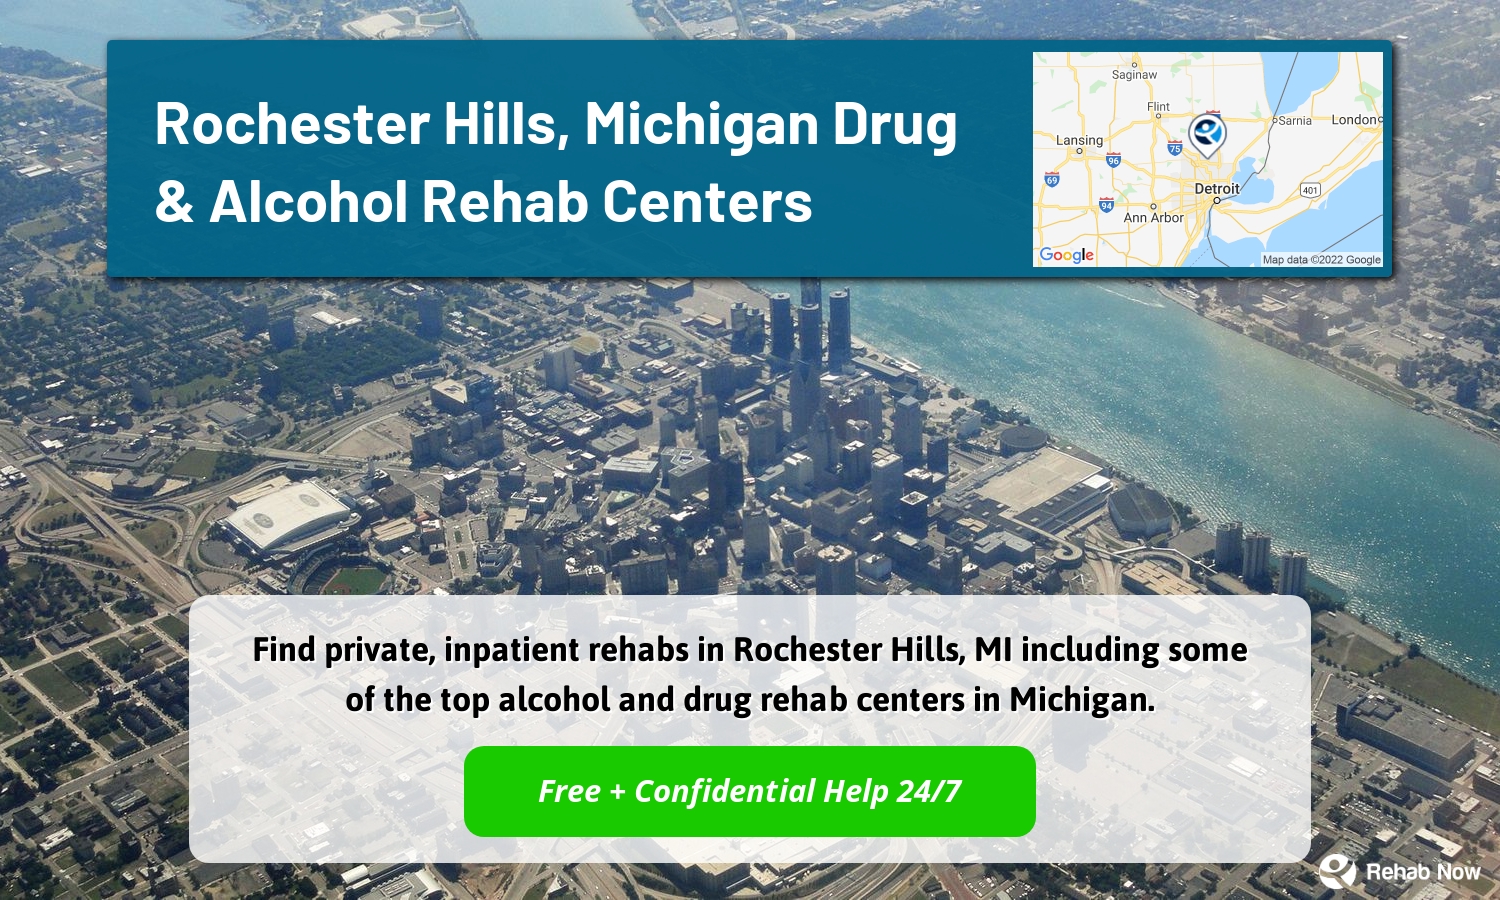 Find private, inpatient rehabs in Rochester Hills, MI including some of the top alcohol and drug rehab centers in Michigan.